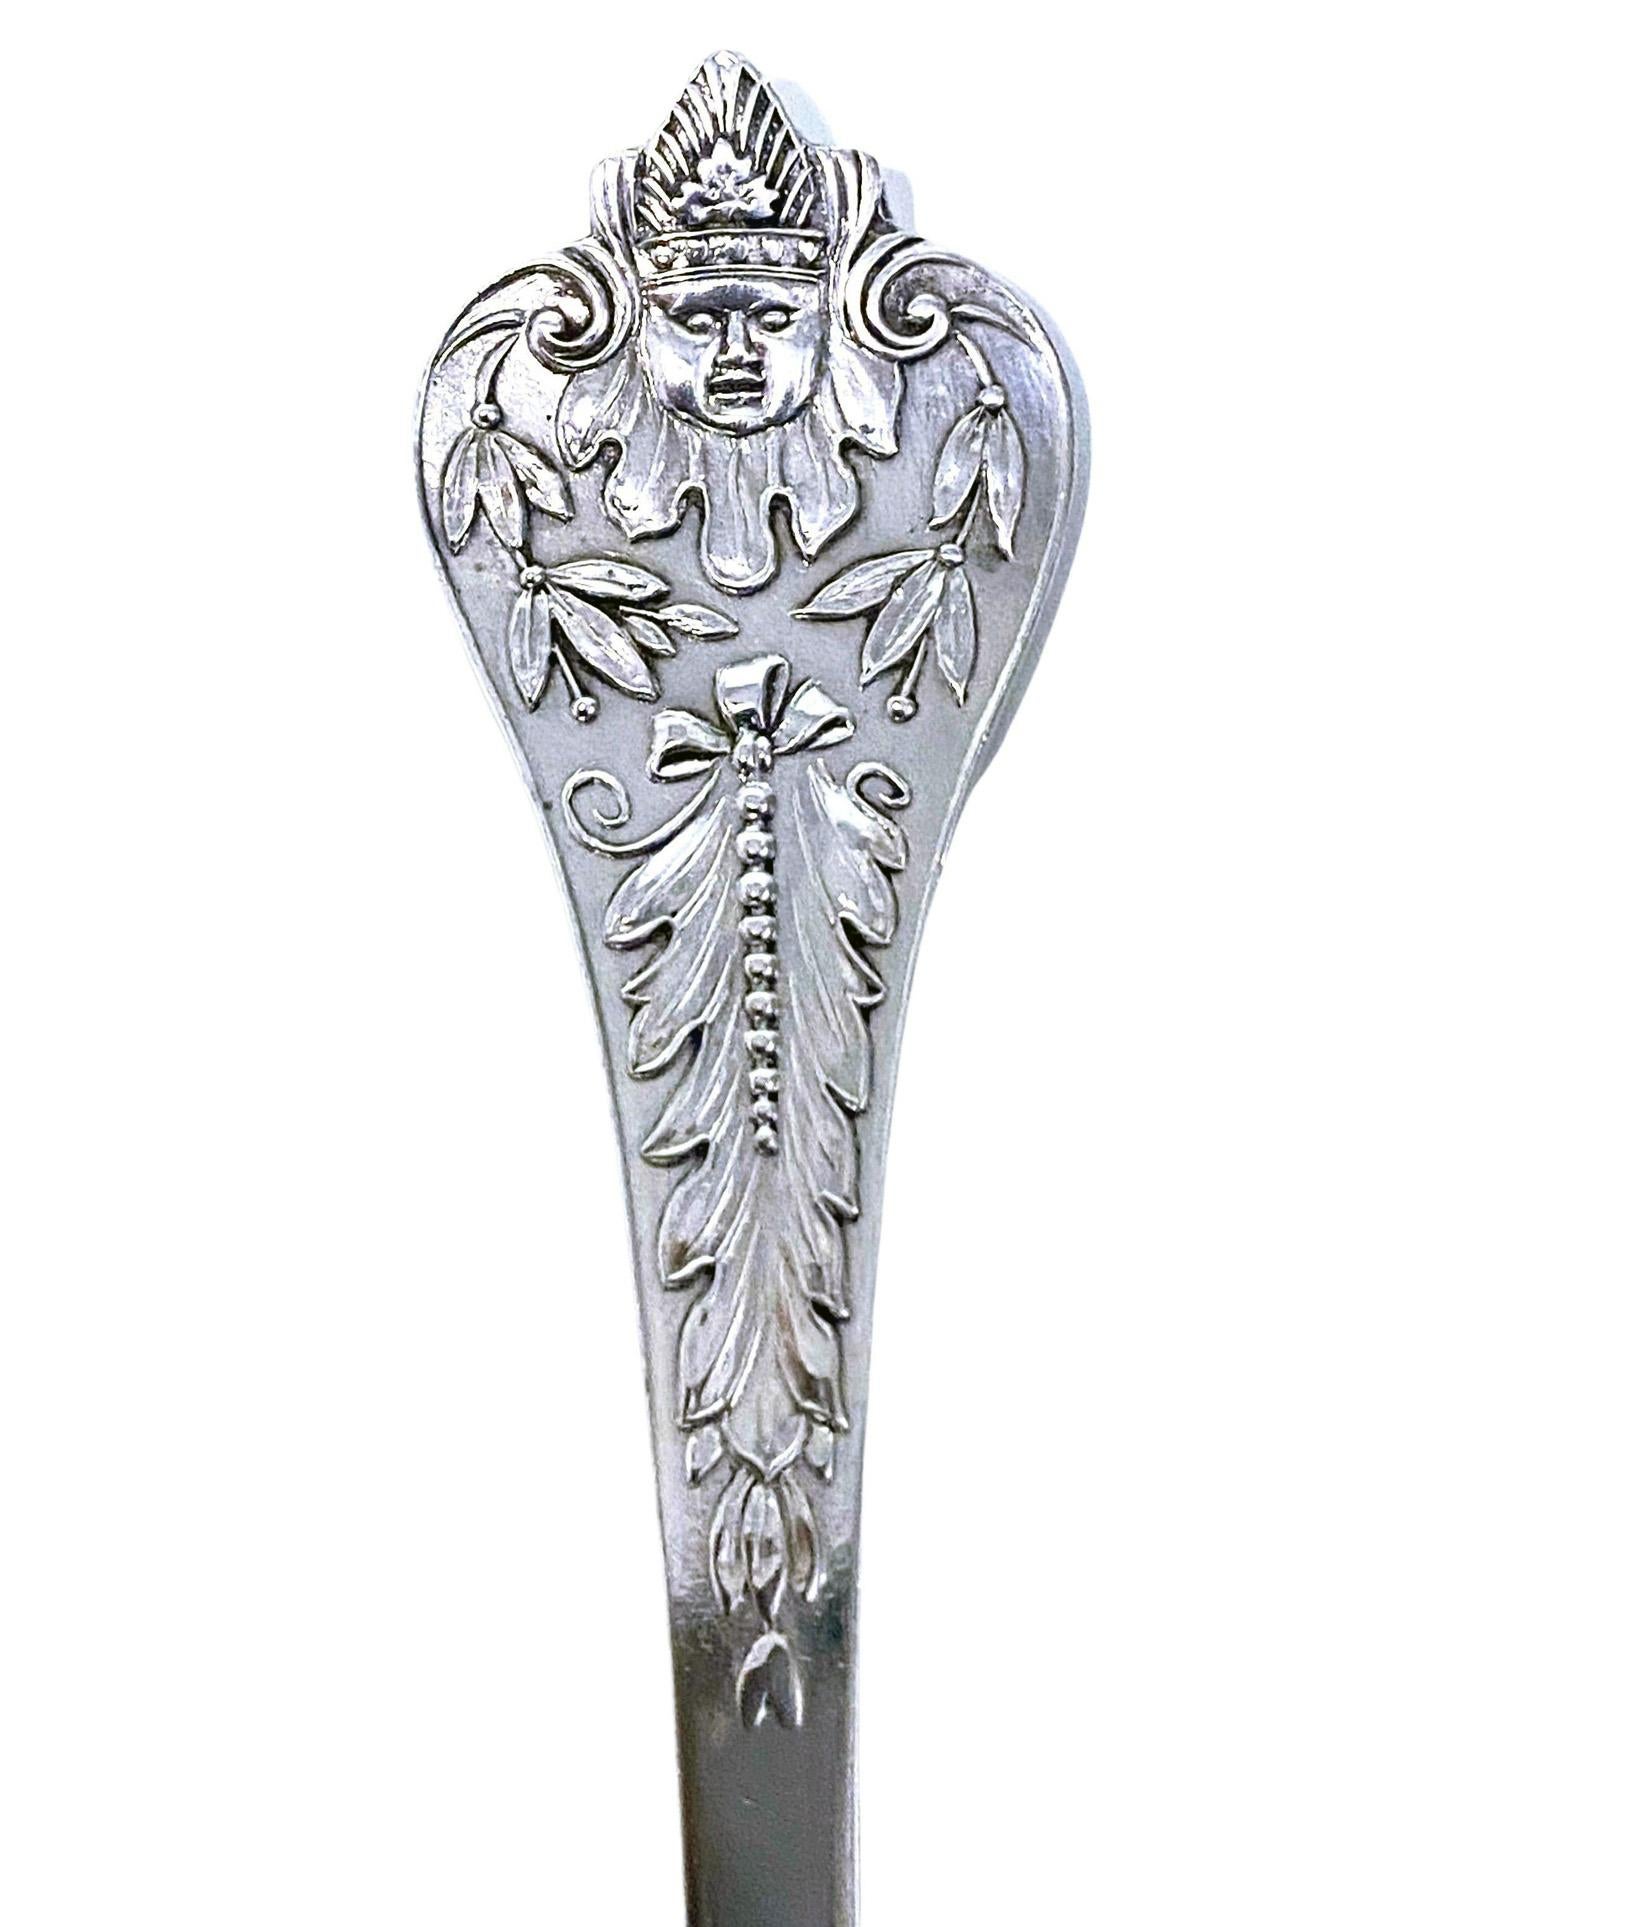 Rare Antique silver figural head spoon, Birmingham 1910 Elkington. Beautifully decorated with figural handle with what appears to be a clown or merrymaker and foliate ribbon stem, partial gilded, scalloped fluted oval bowl. Length: 6.5 inches.